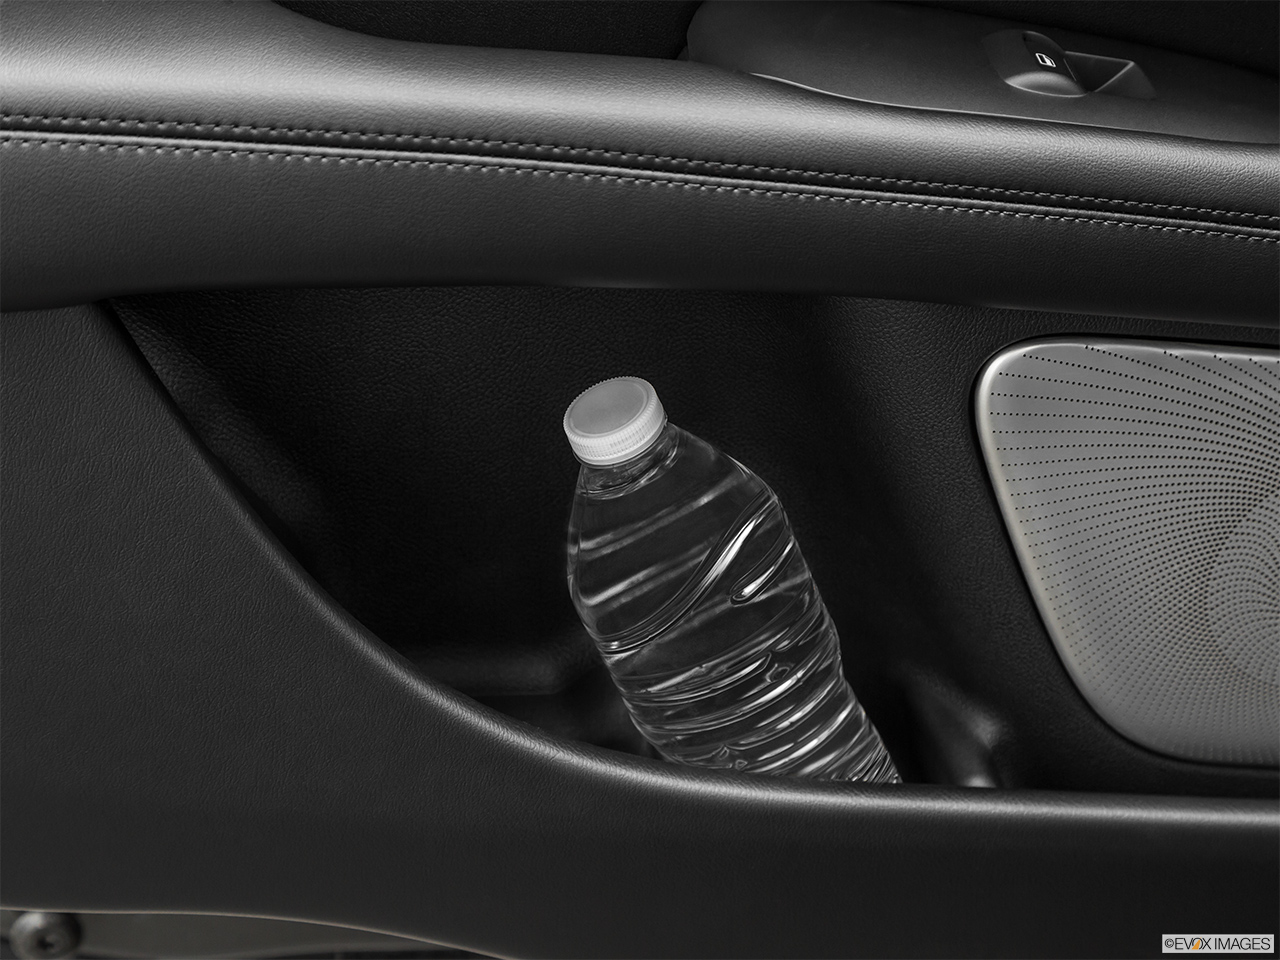 2020 Lincoln MKZ Reserve Second row side cup holder with coffee prop, or second row door cup holder with water bottle. 